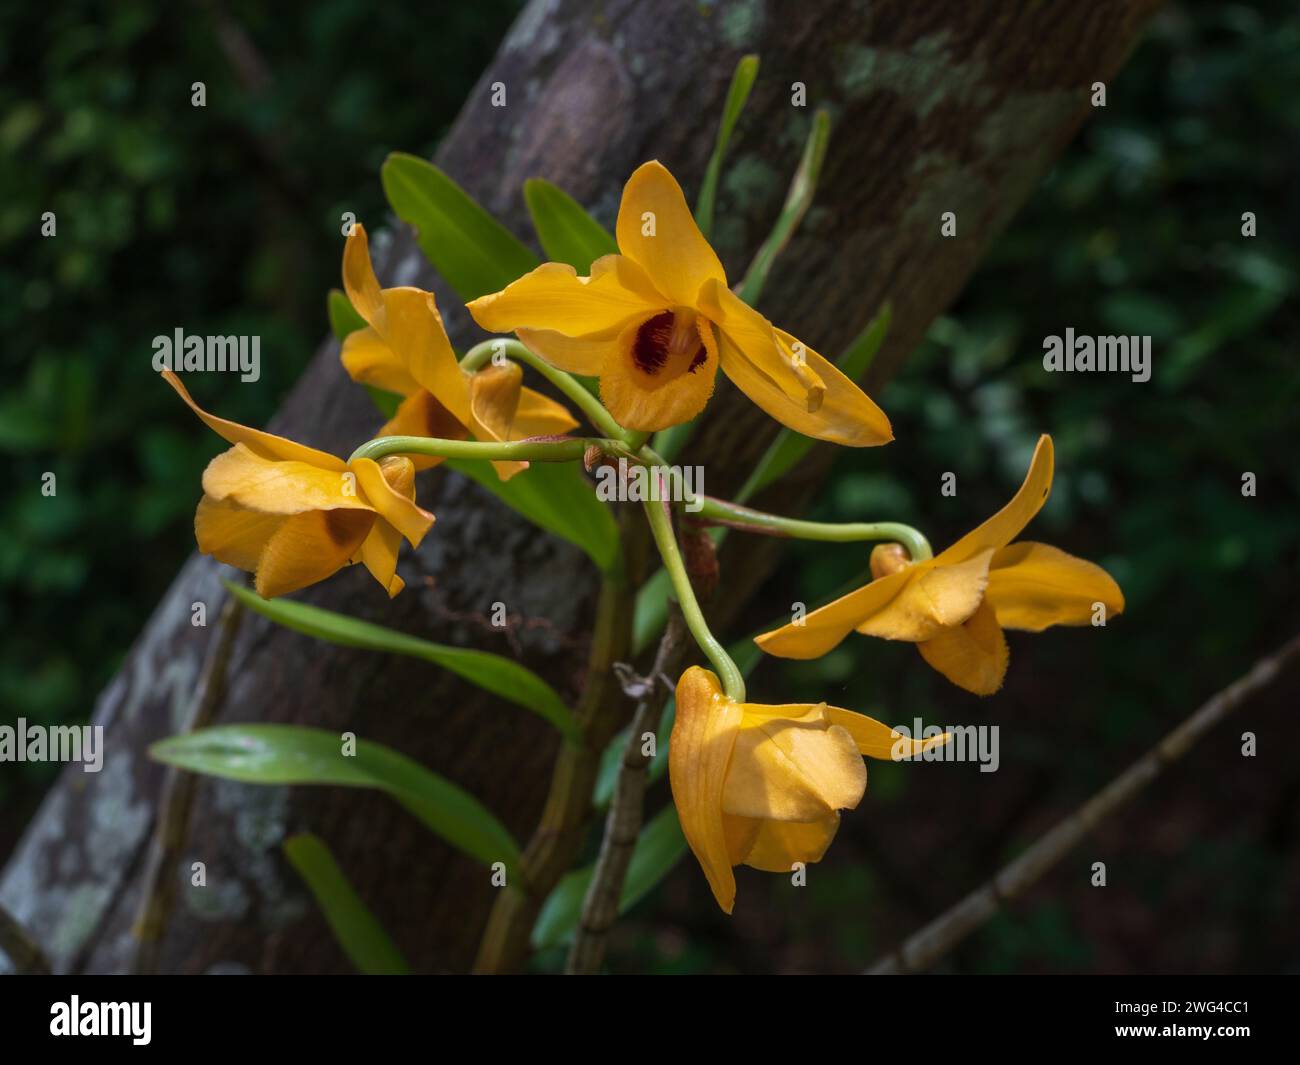 Closeup view of epiphytic tropical orchid species dendrobium moschatum bright yellow and dark red flowers isolated outdoors on dark natural background Stock Photo